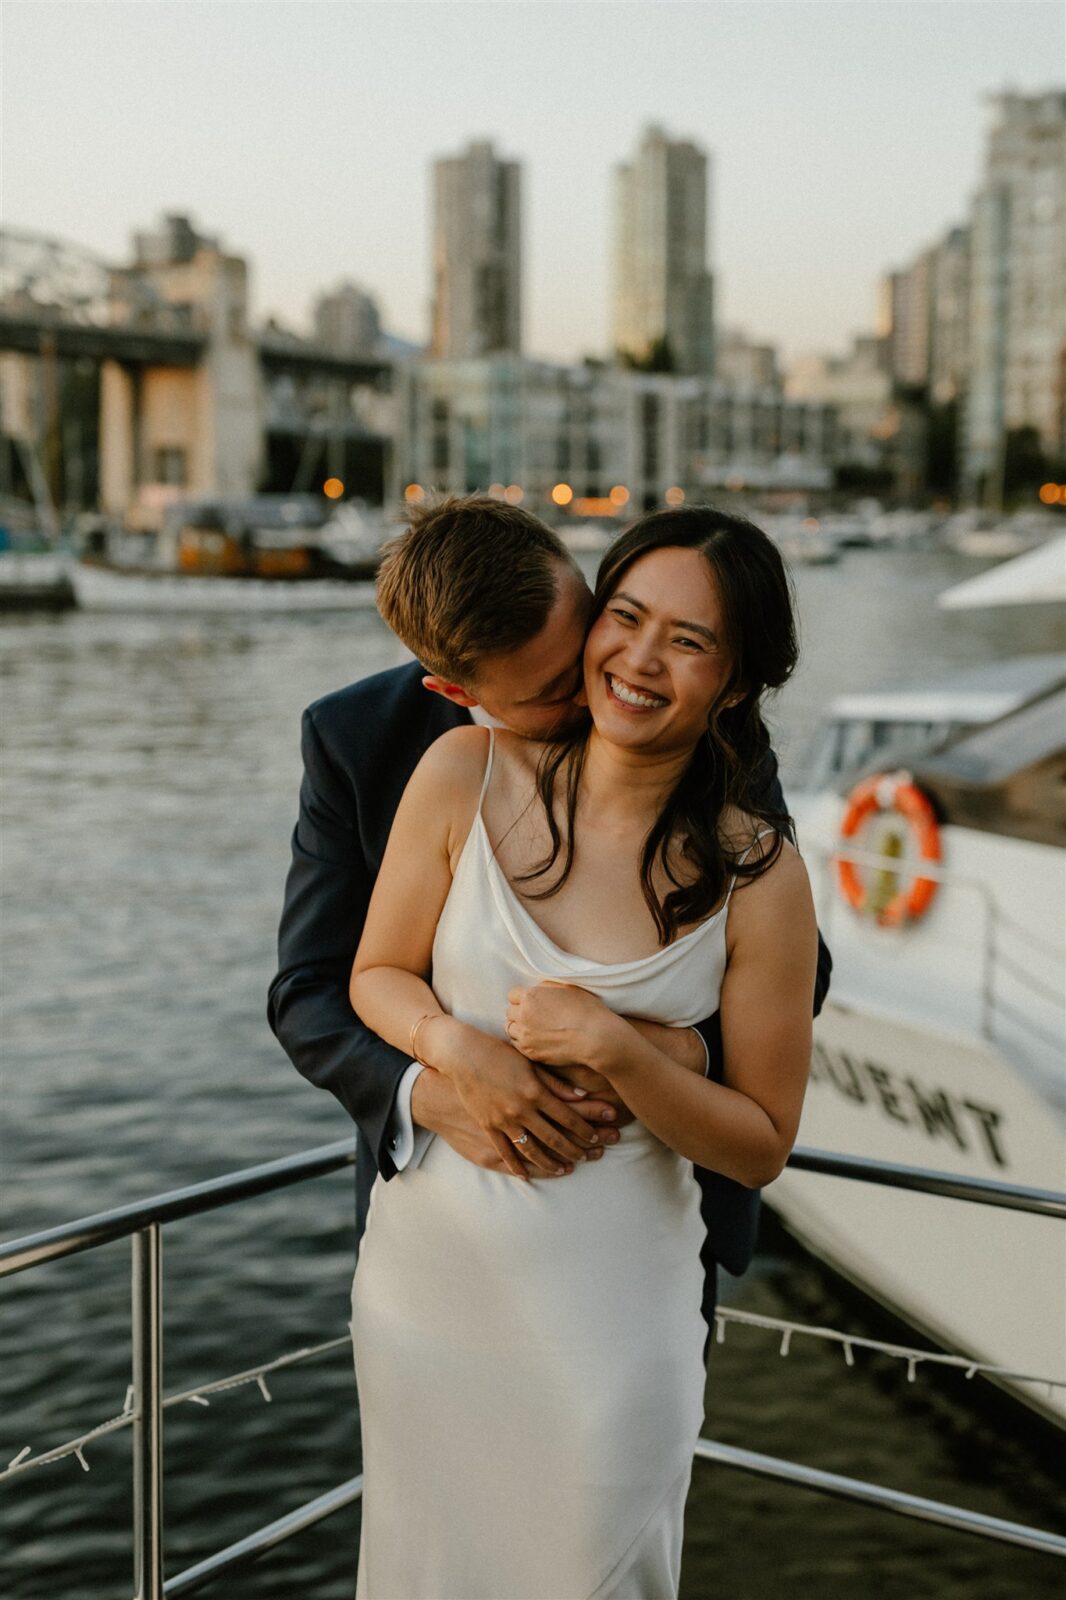 Bride and groom embrace on boat during Vancouver's Festival of Lights. Bridal hair by The Attic Hair Studio, and makeup by Beauty Awakened.